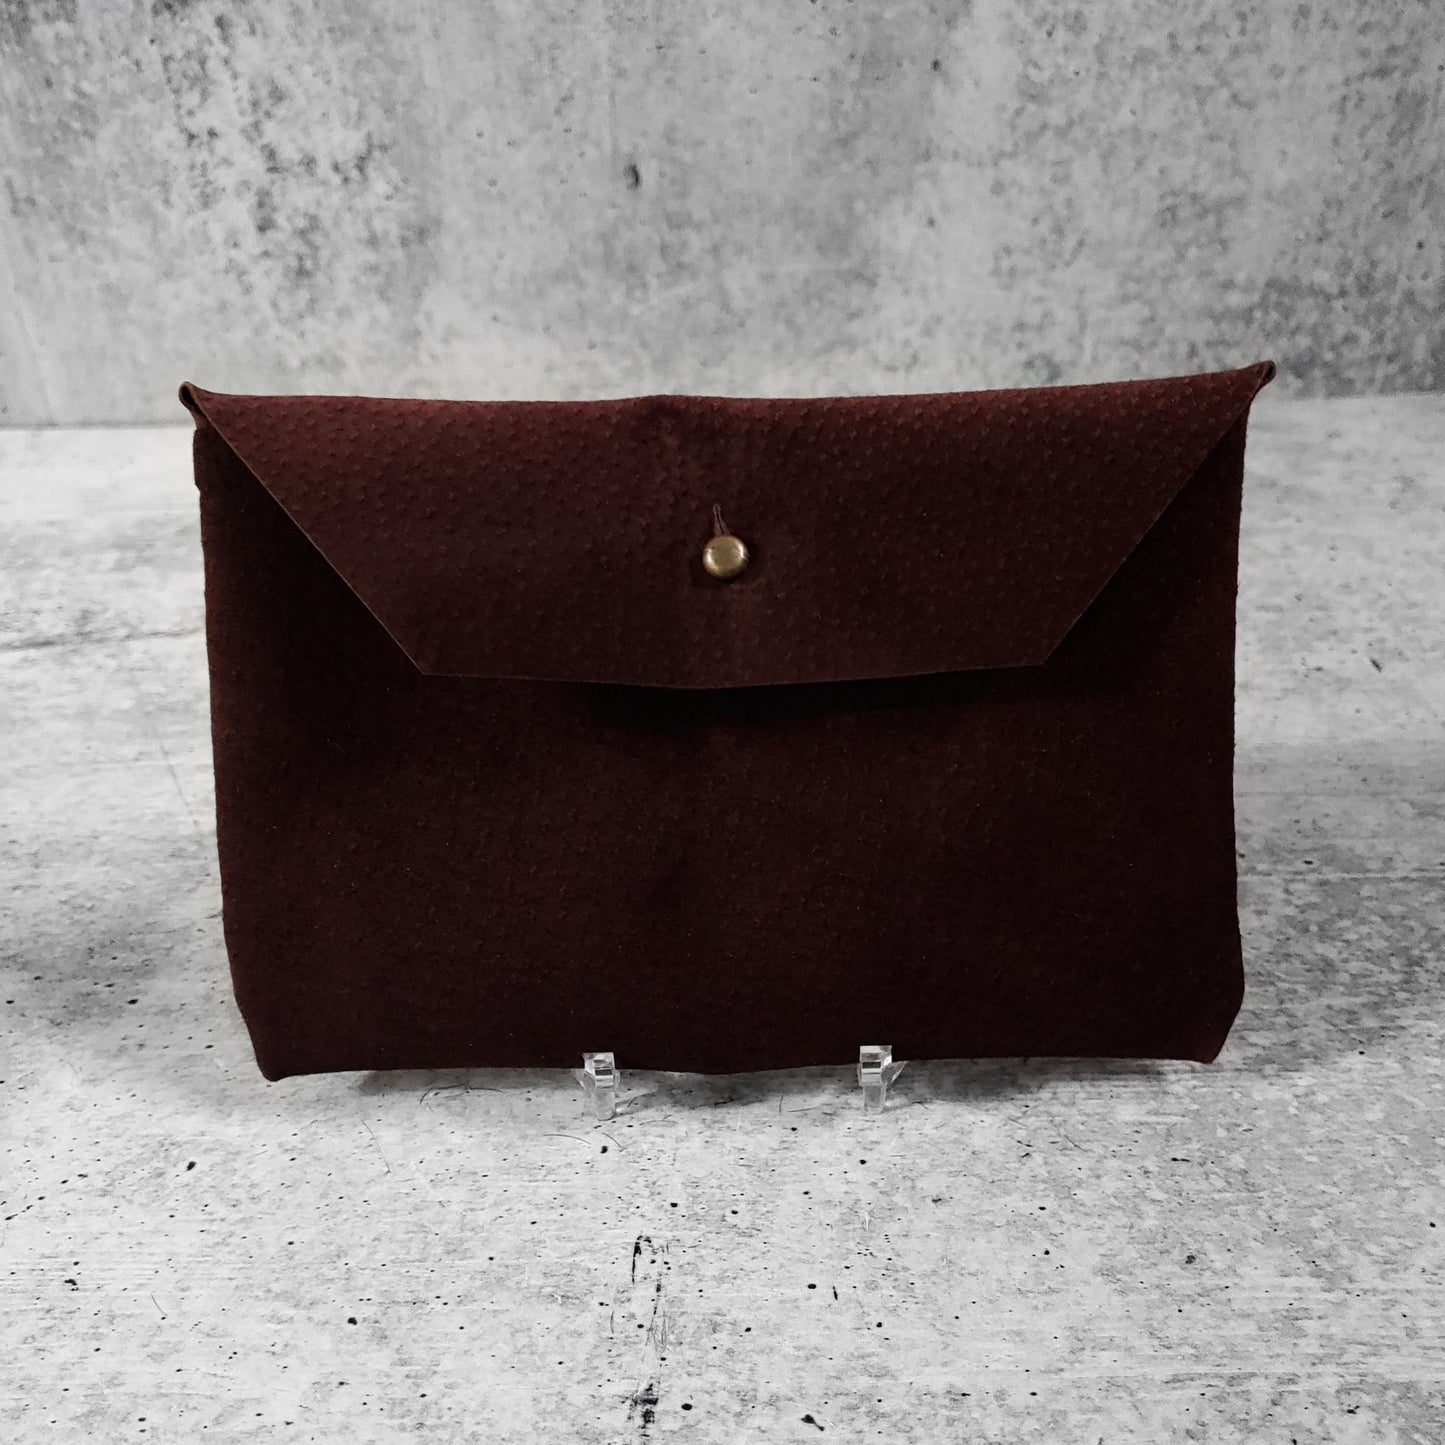 Front facing view of "soft suede clutch trapezoid" in chocolate against a concrete background.